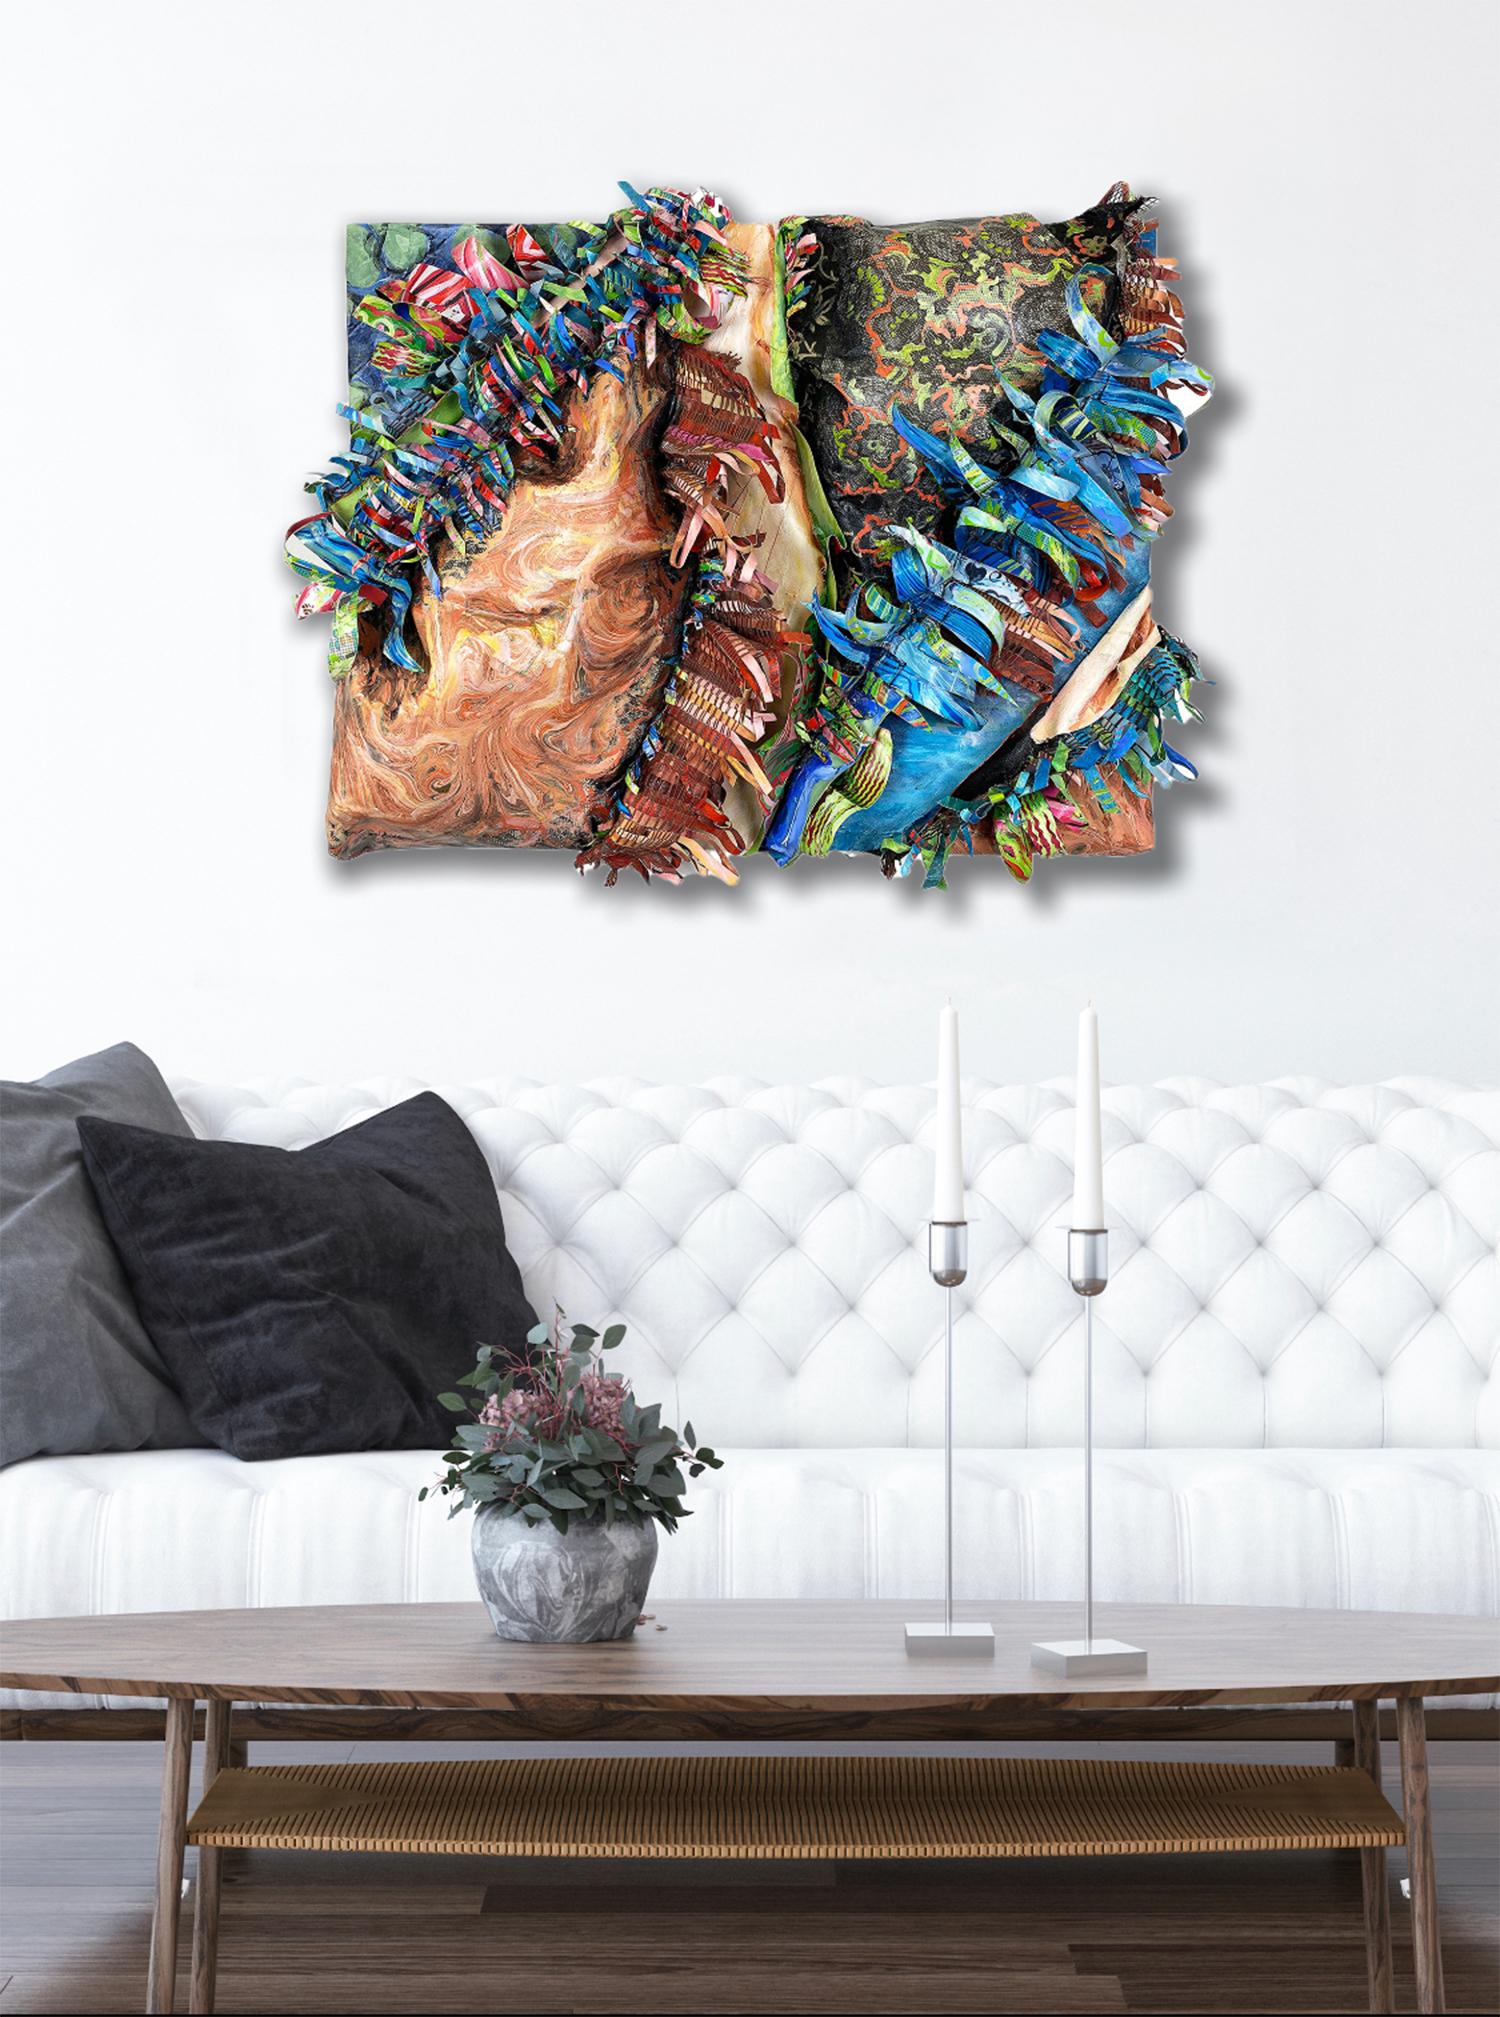 Sculpture meets painting and assemblage in these textural dimensional abstract paintings by Brooklyn based artist Christina Massey. Painstakingly hand stitched and woven together, combining traditional materials such as canvas and acrylic paint with